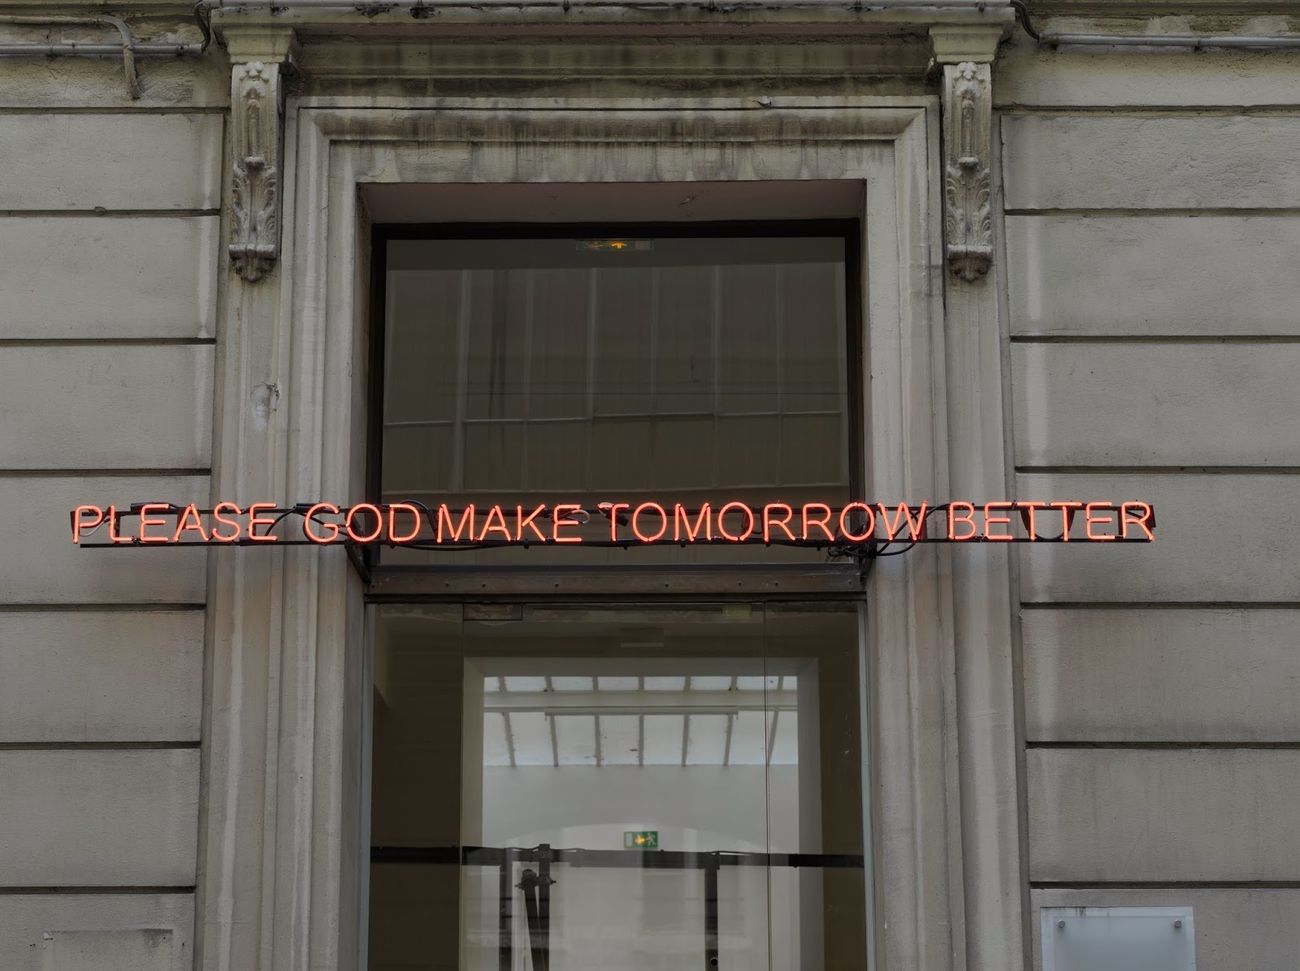 Claire Fontaine, Please God Make Tomorrow Better, 2008. Courtesy of the artist & T293